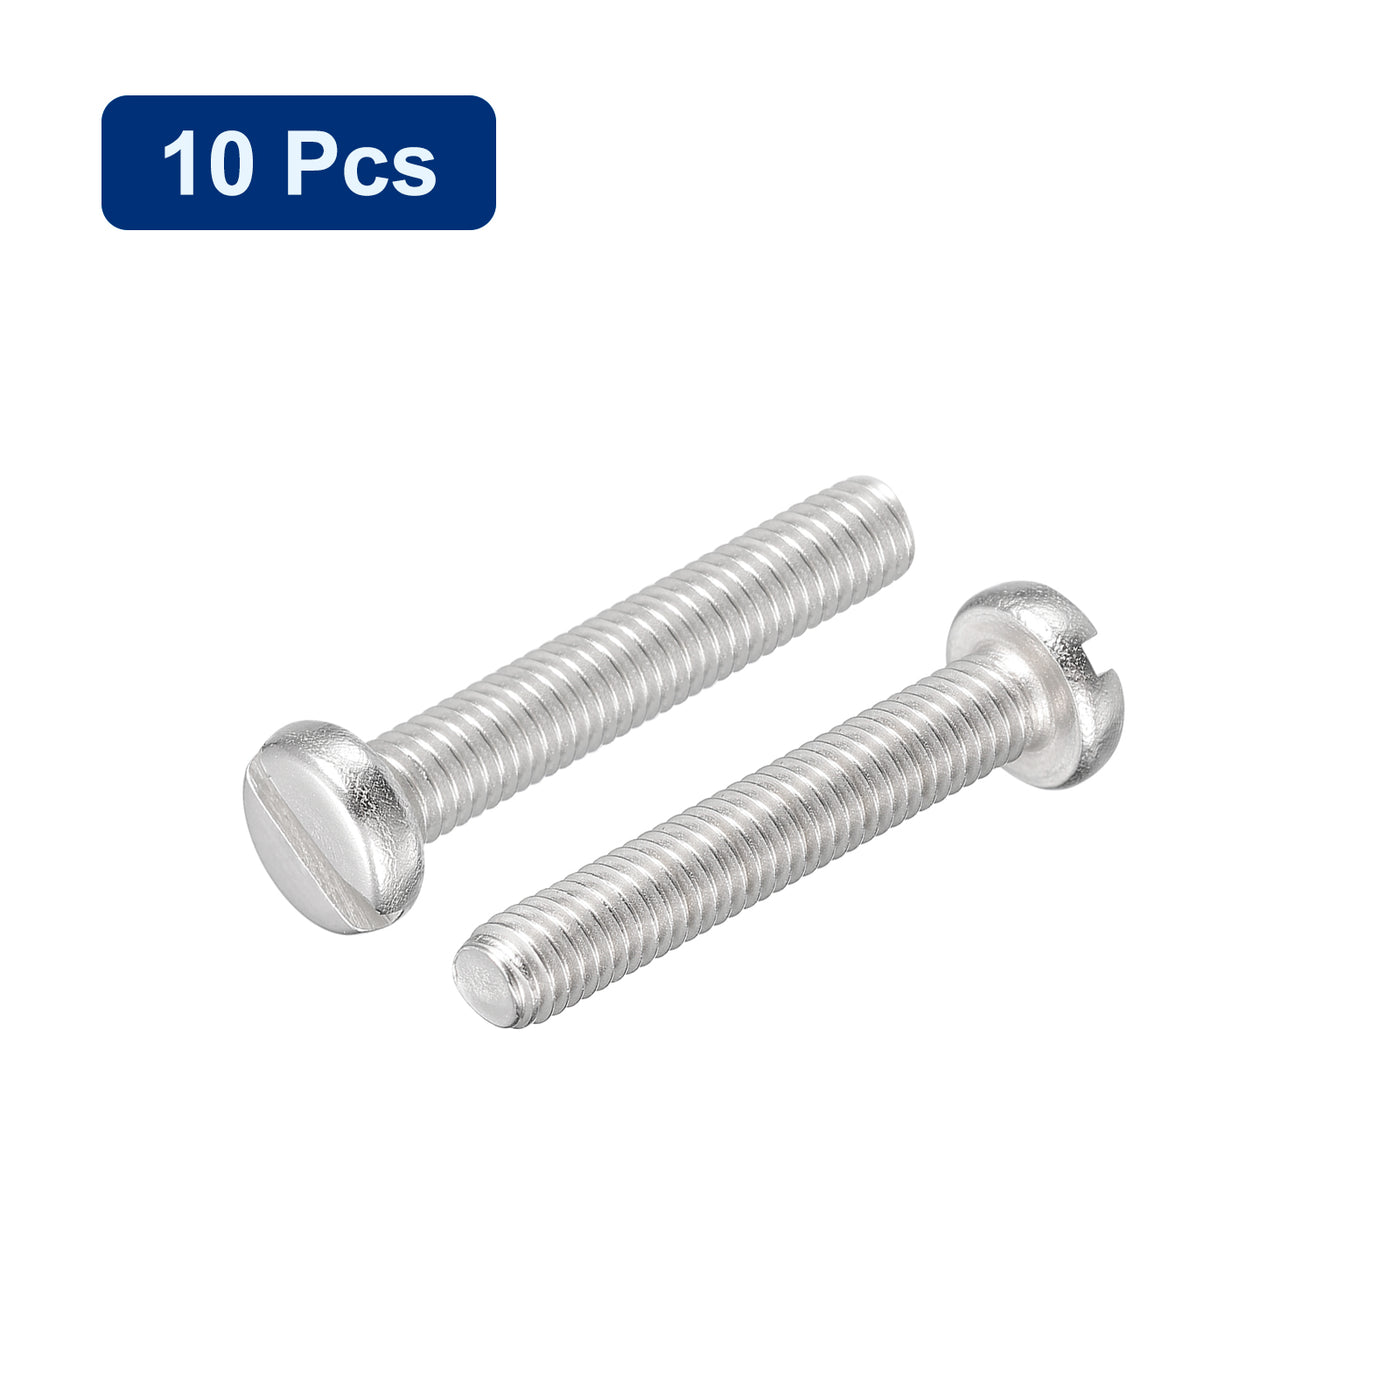 uxcell Uxcell 304 Stainless Steel Machine Screws Slotted Pan Head Screw Bolts